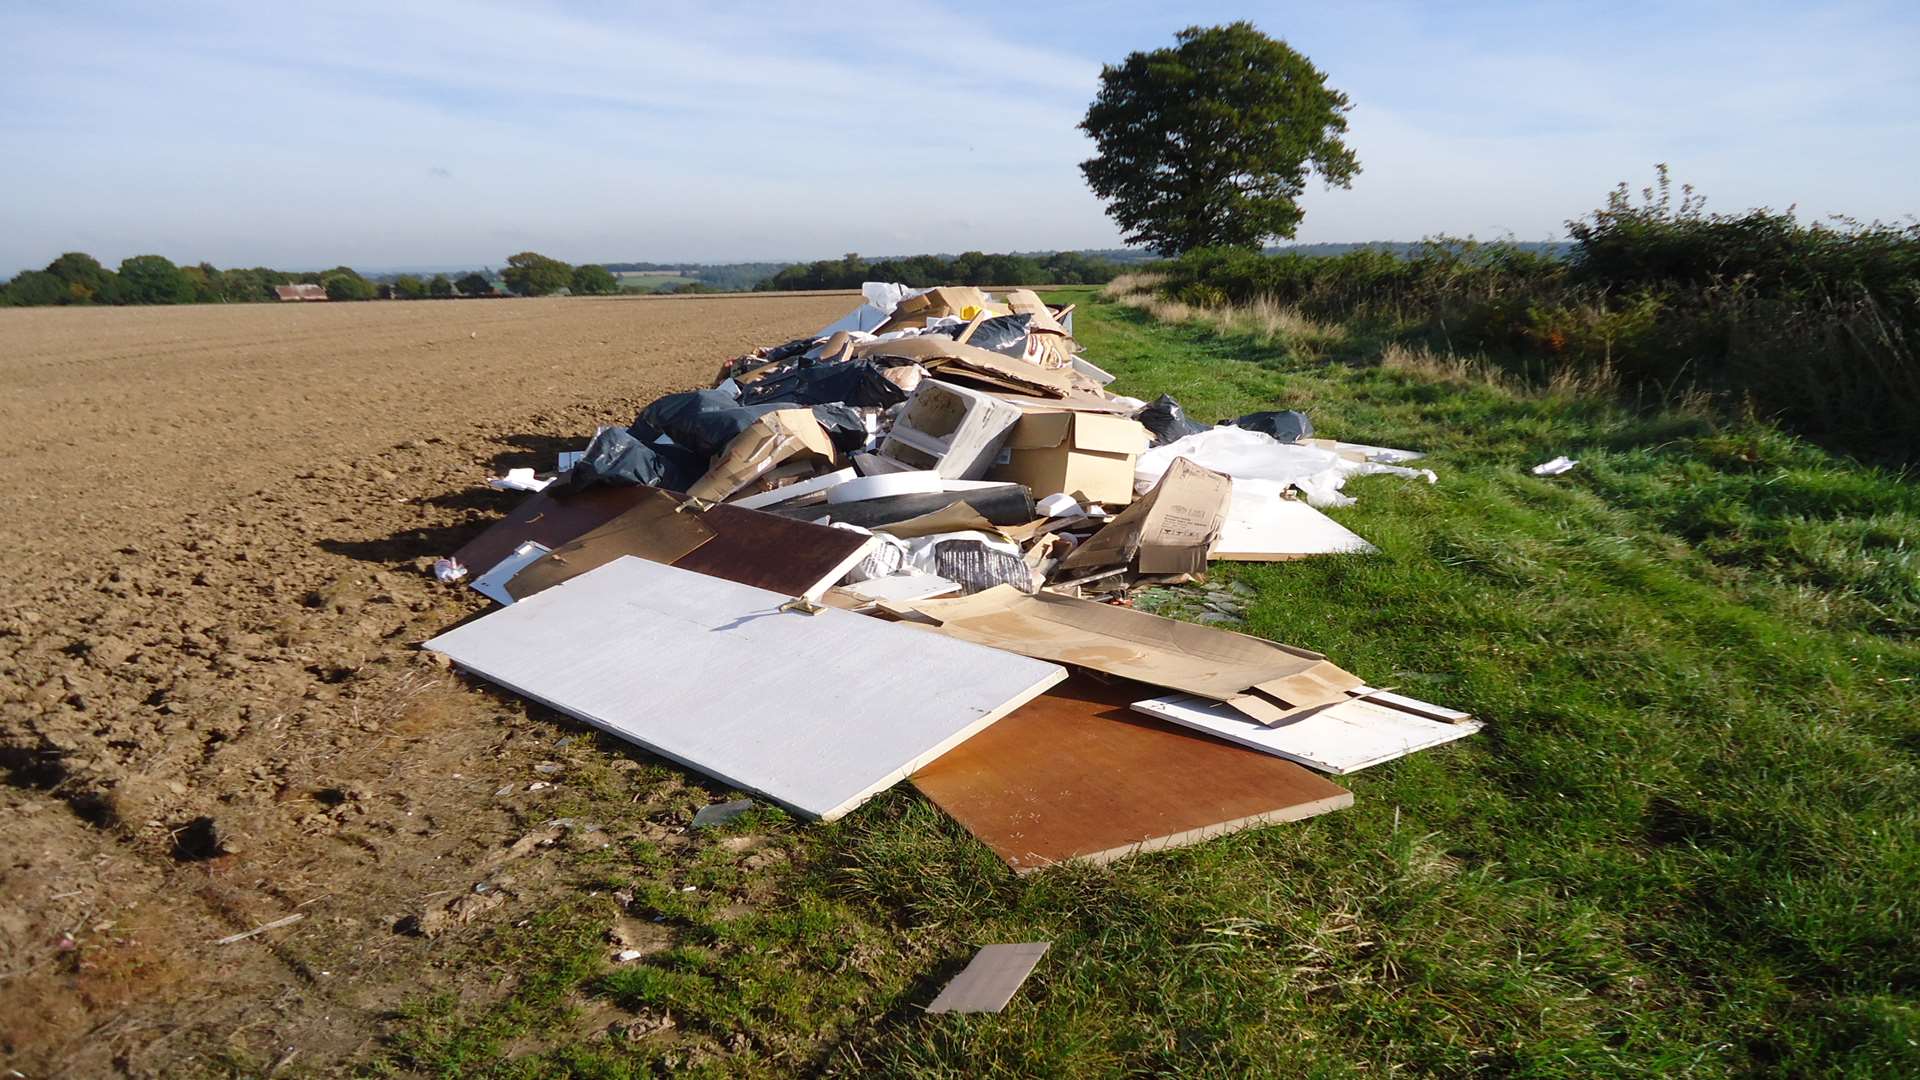 Ashley Martin dumped rubbish in several parts of the county